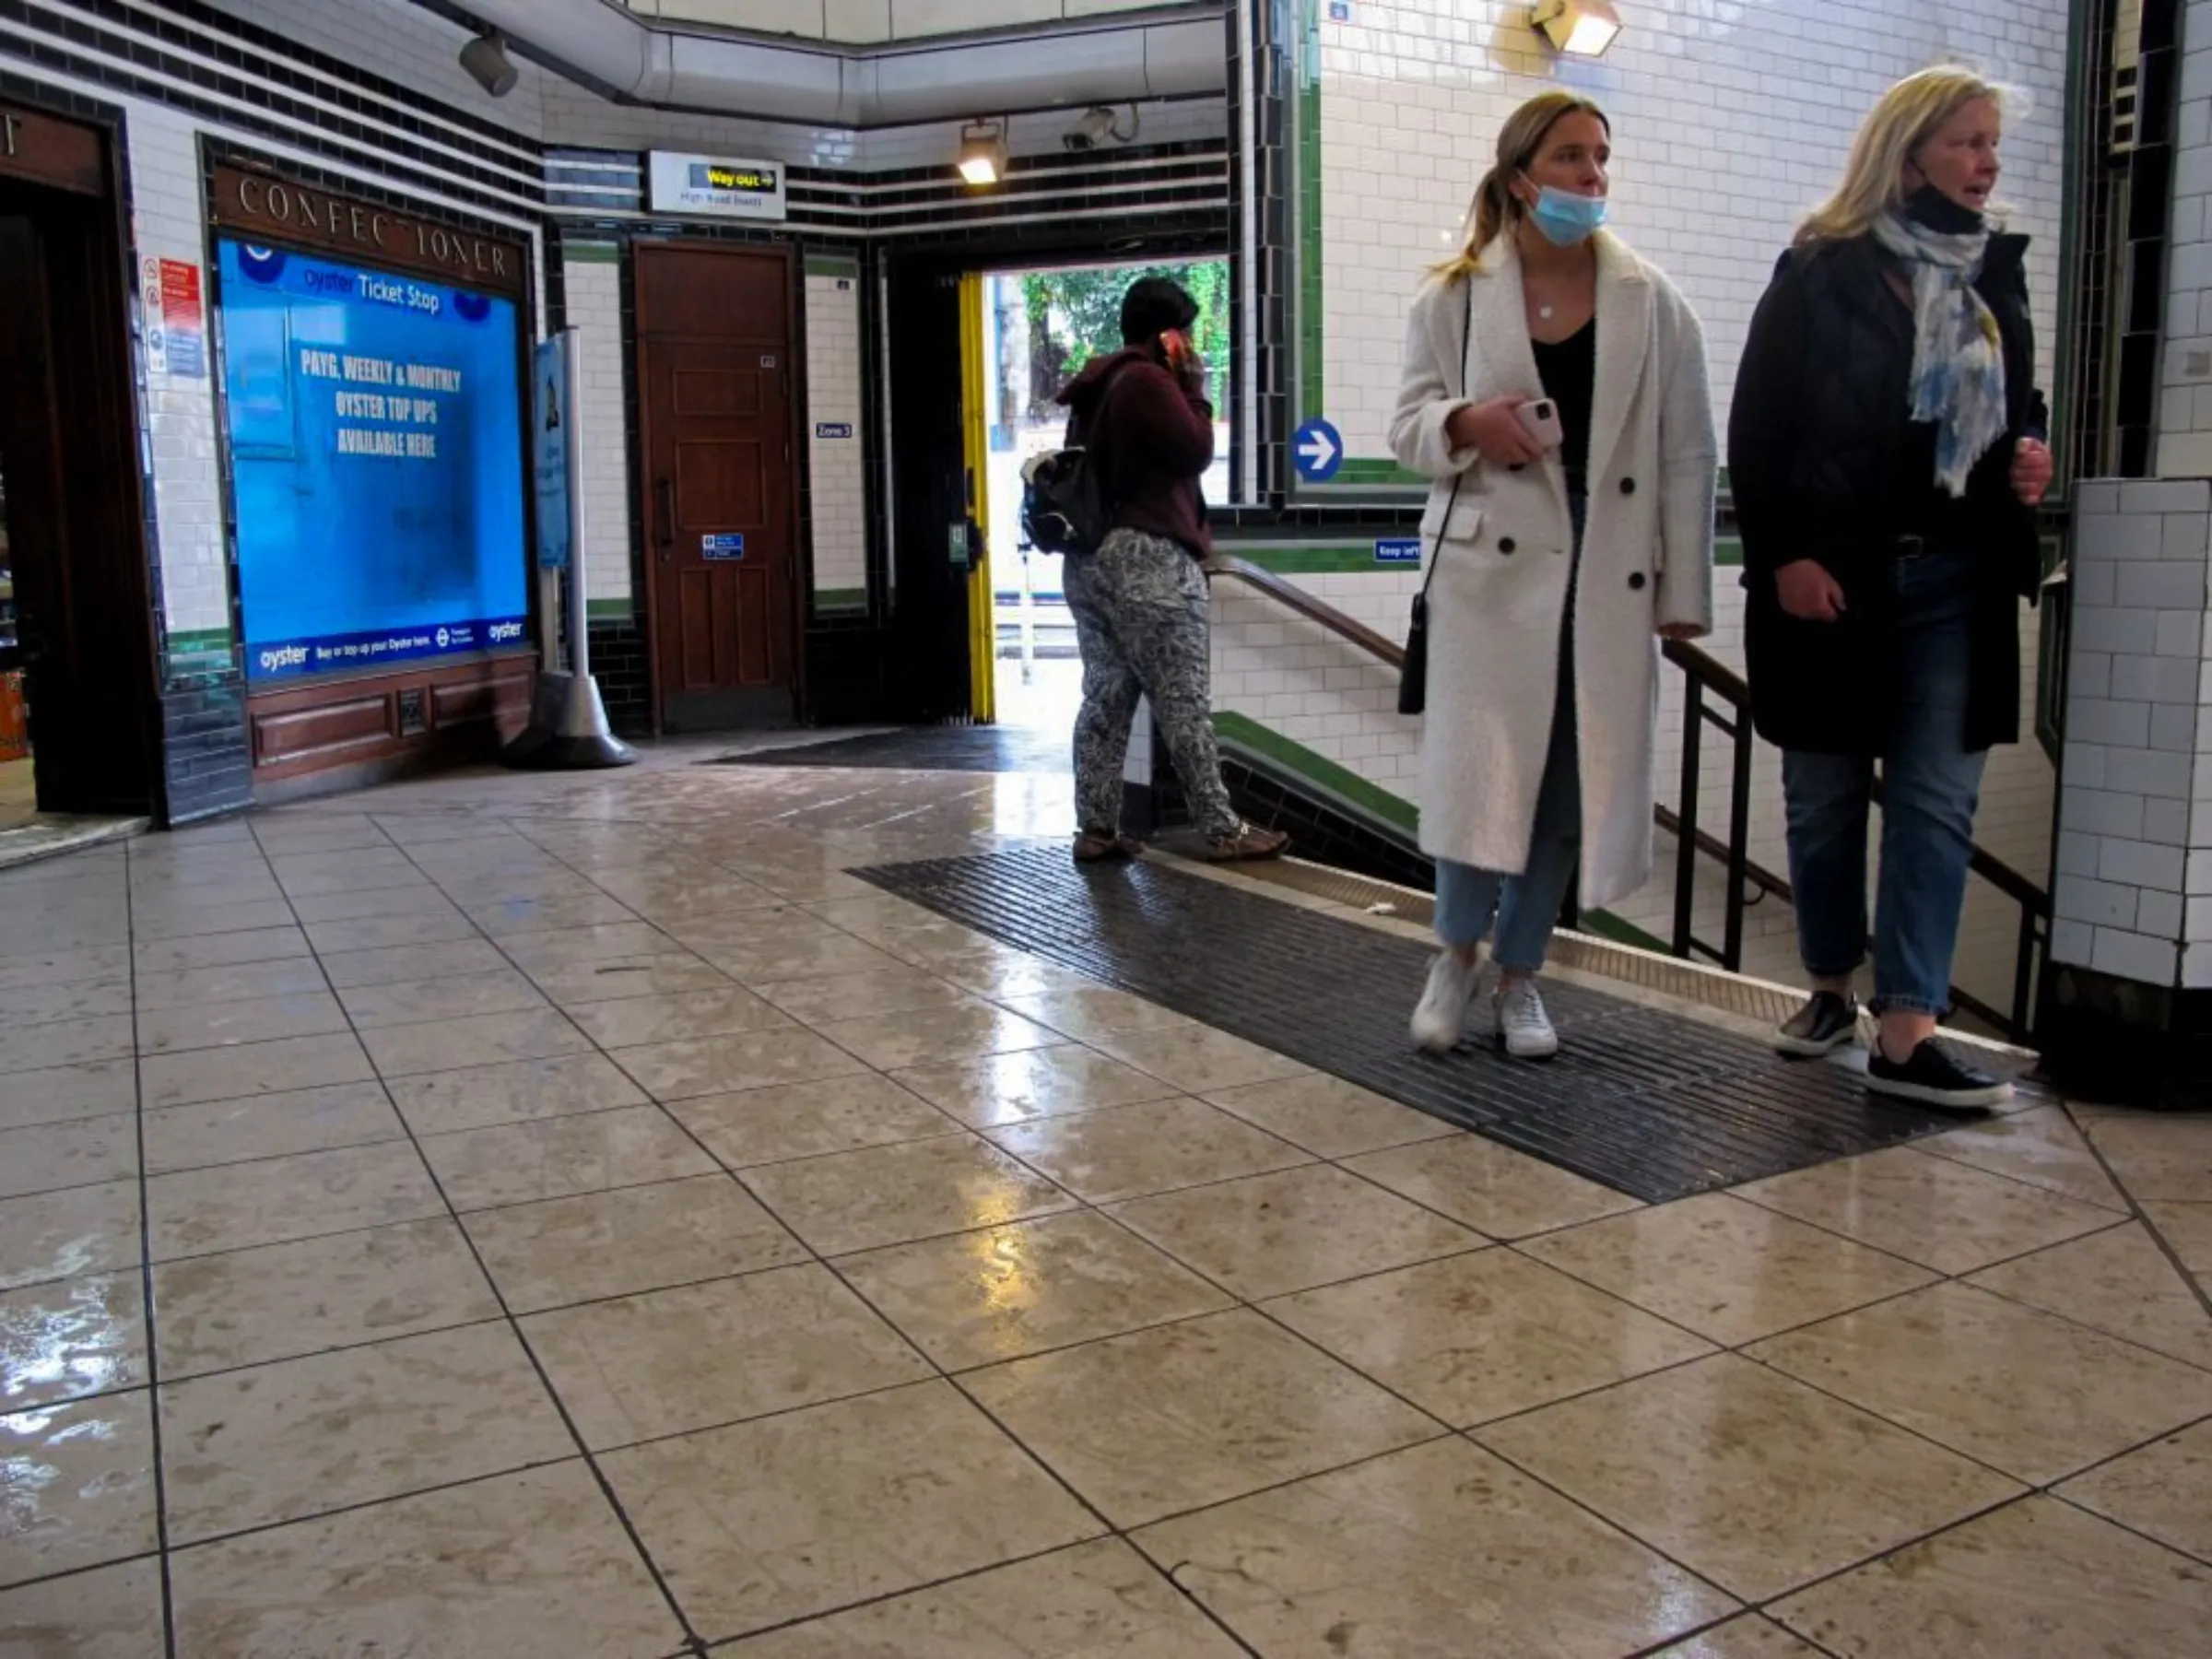 Northern Line commuters walk through a wet Balham Station in south London, England, after rain on October 18, 2021